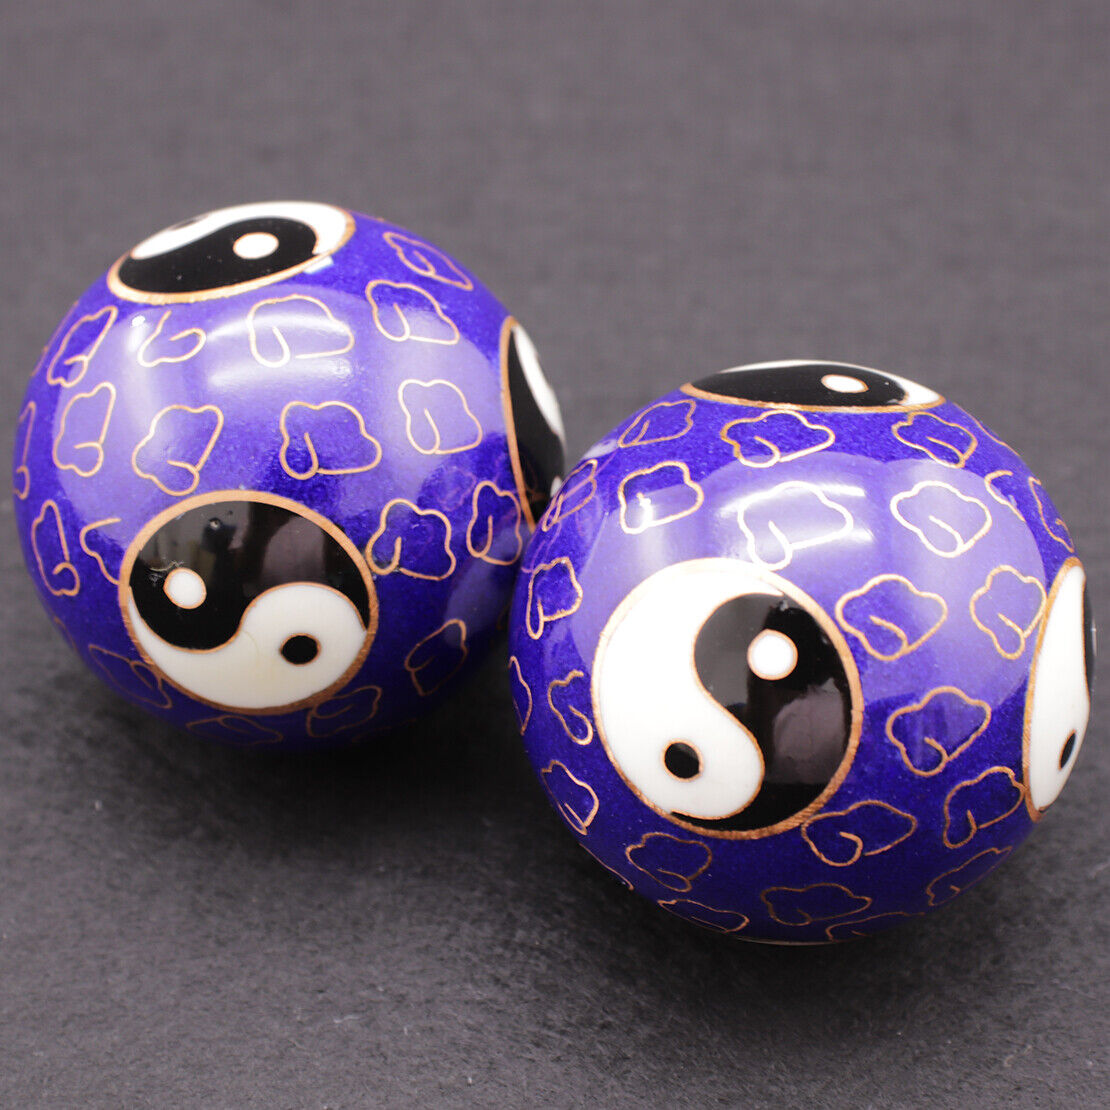 2x 50mm Yin Yang Chinese Baoding Balls Health Exercise Stress Relaxation Therapy